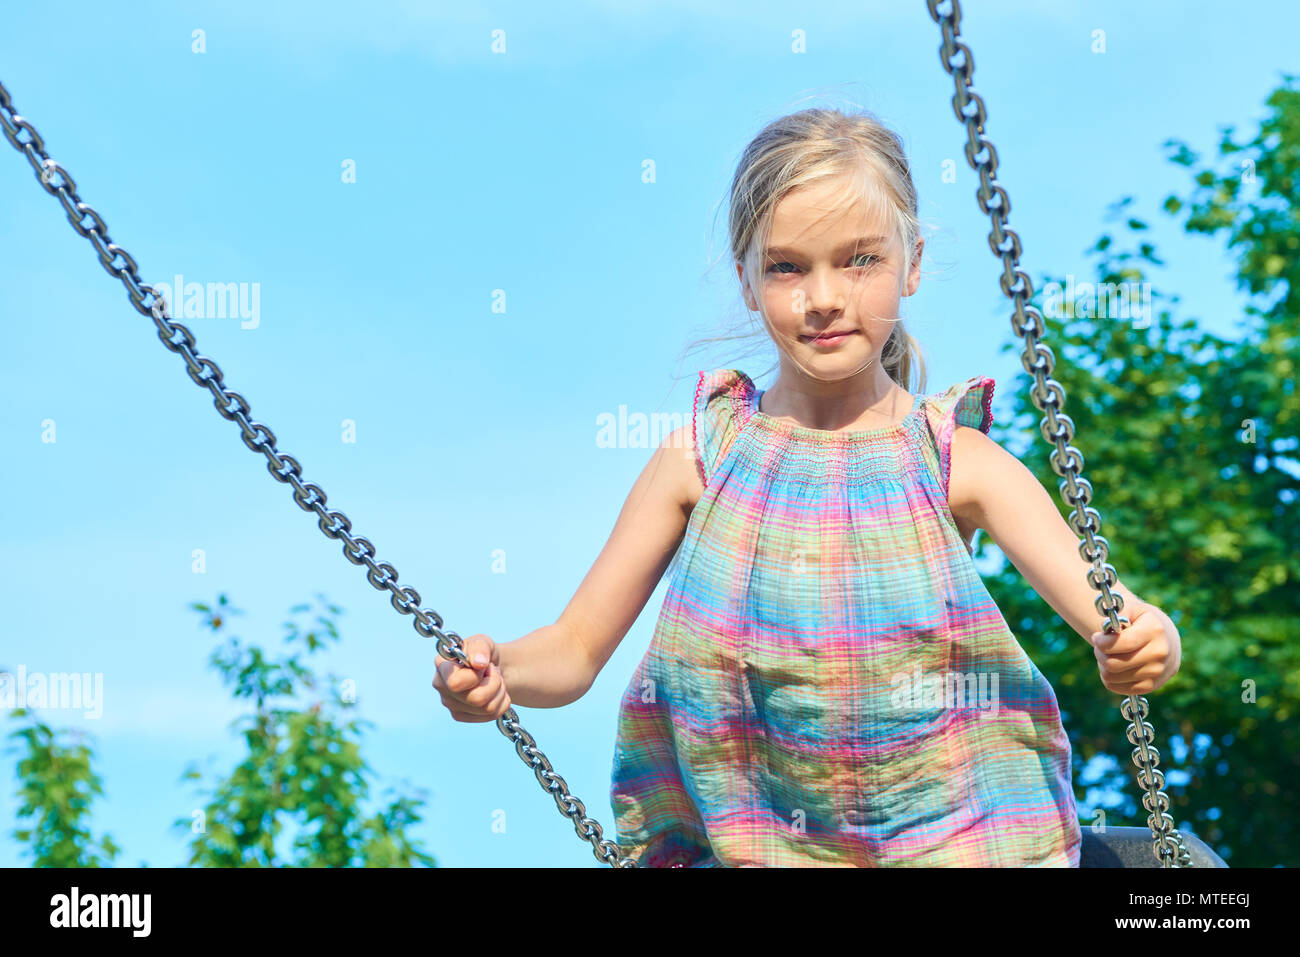 Little child blond girl having fun on a swing outdoor. Summer playground. Girl swinging high. Young child on swing outdoors. Stock Photo